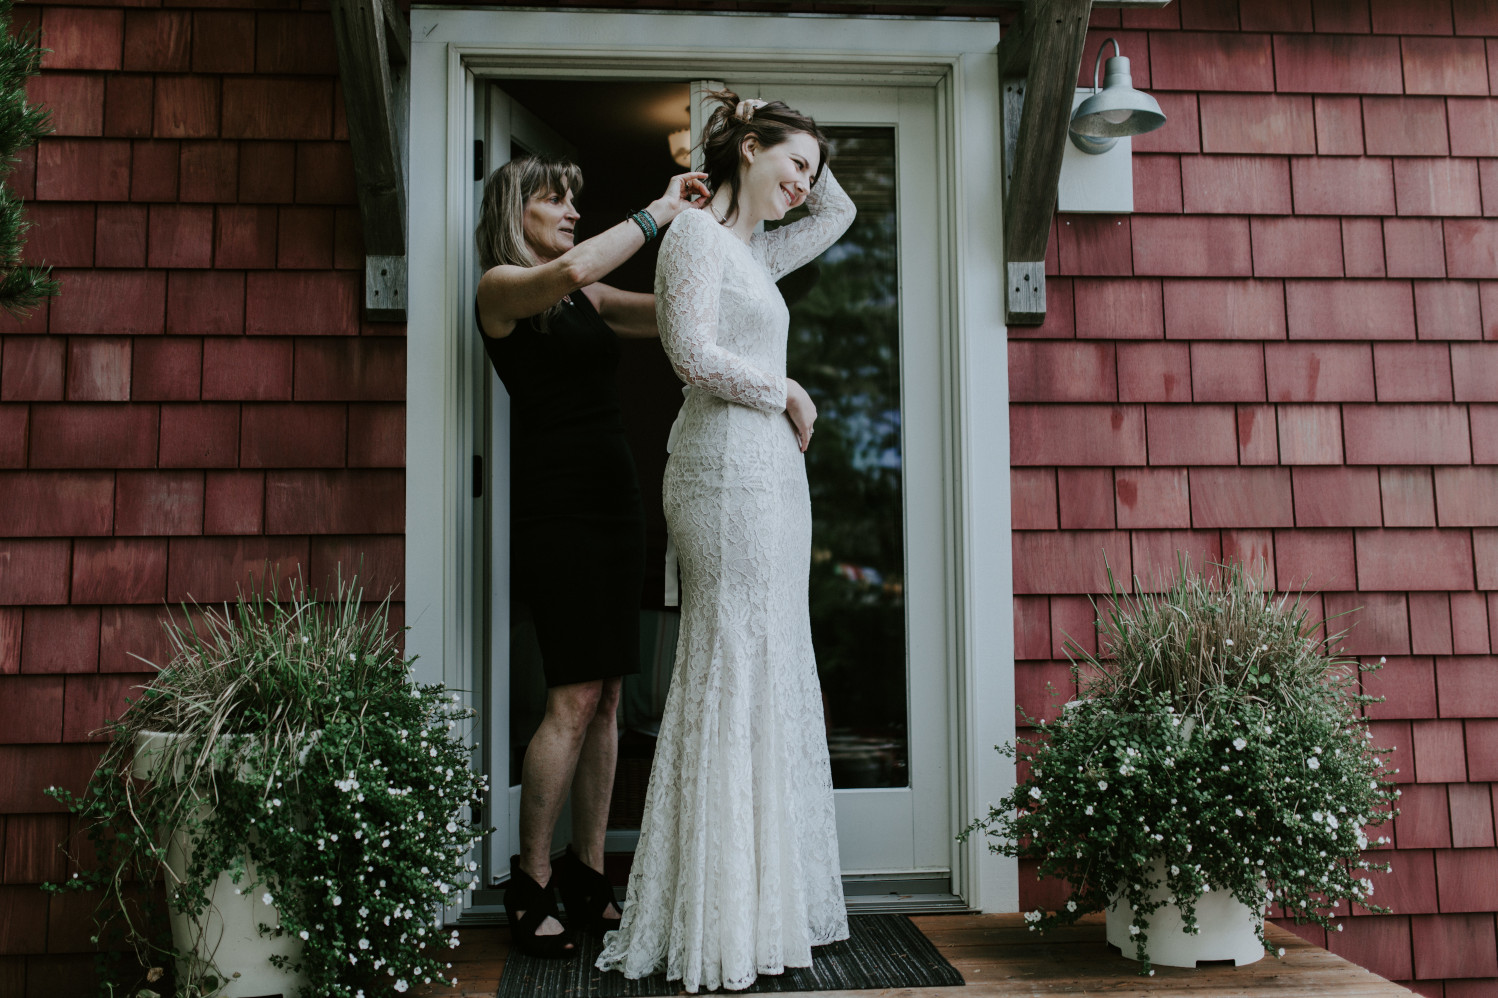 Nicole's mom helps finish the dress. Elopement wedding photography at Cannon Beach by Sienna Plus Josh.